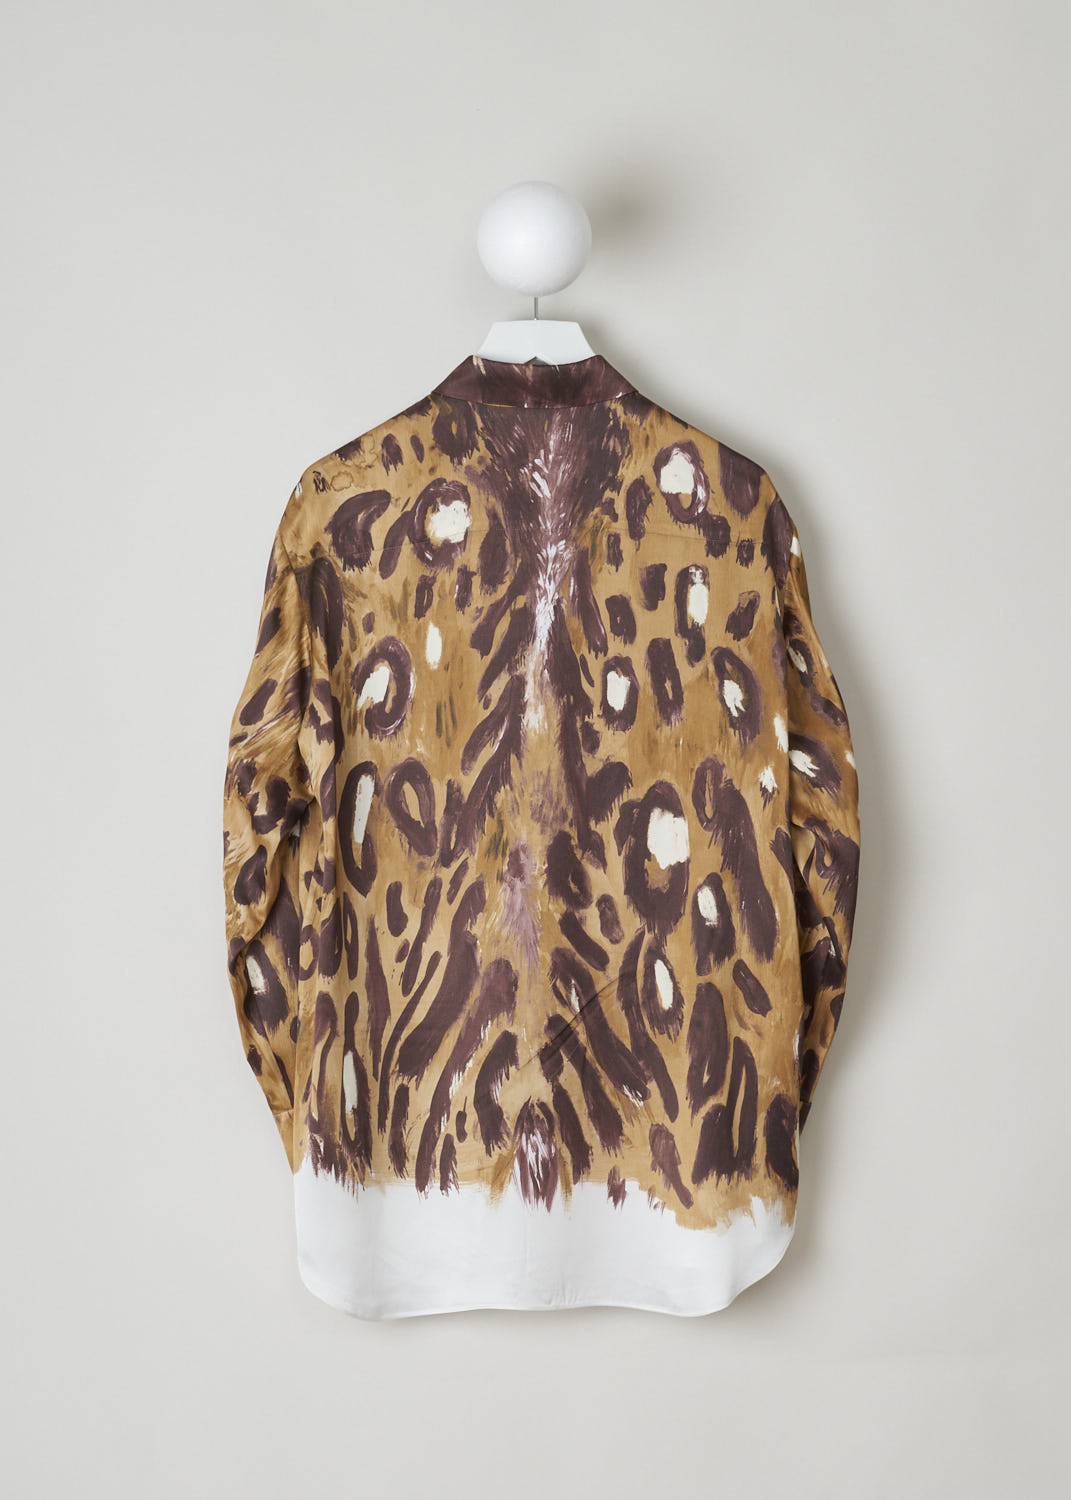 MARNI, ANIMAL PRINT BLOUSE WITH LONG SLEEVES, CAMA0490A0_UTV912_WBM20, Print, Brown, Back, This long sleeved blouse is made in a satin animal print. This blouse features a classic collar, a single breast pocket and front button fastening. This model has an asymmetrical finish, meaning the back is a little longer than the front.


